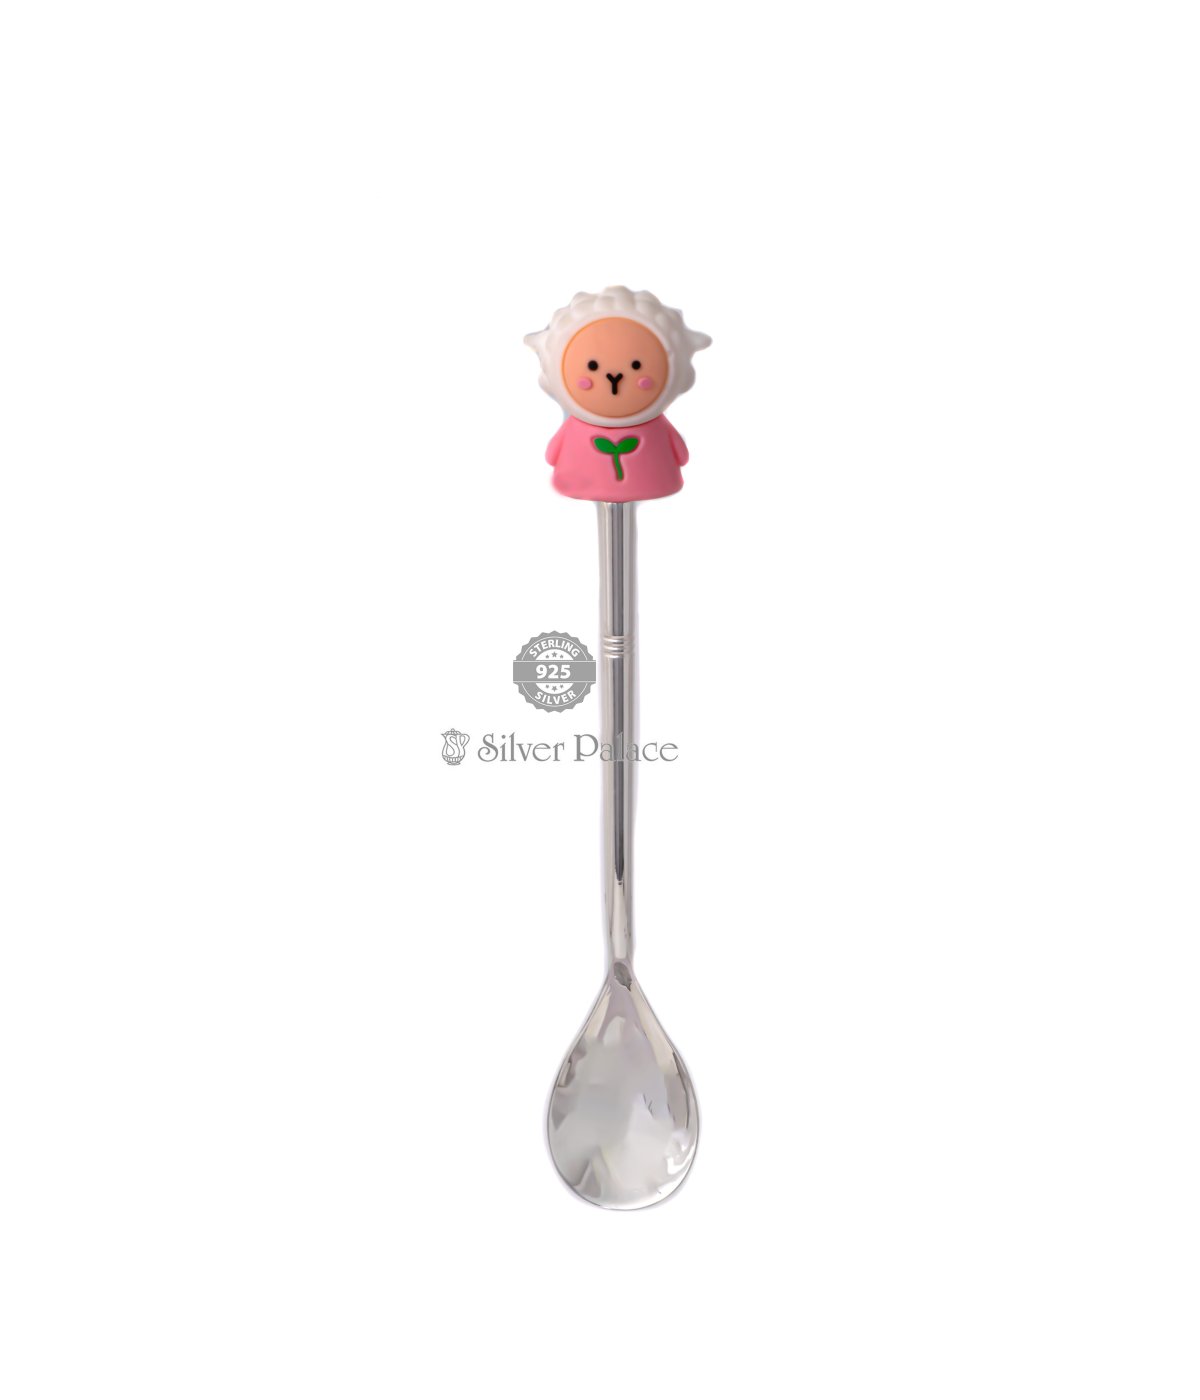  925 SILVER SPOON FOR BABY WITH SILICON CARTOON 